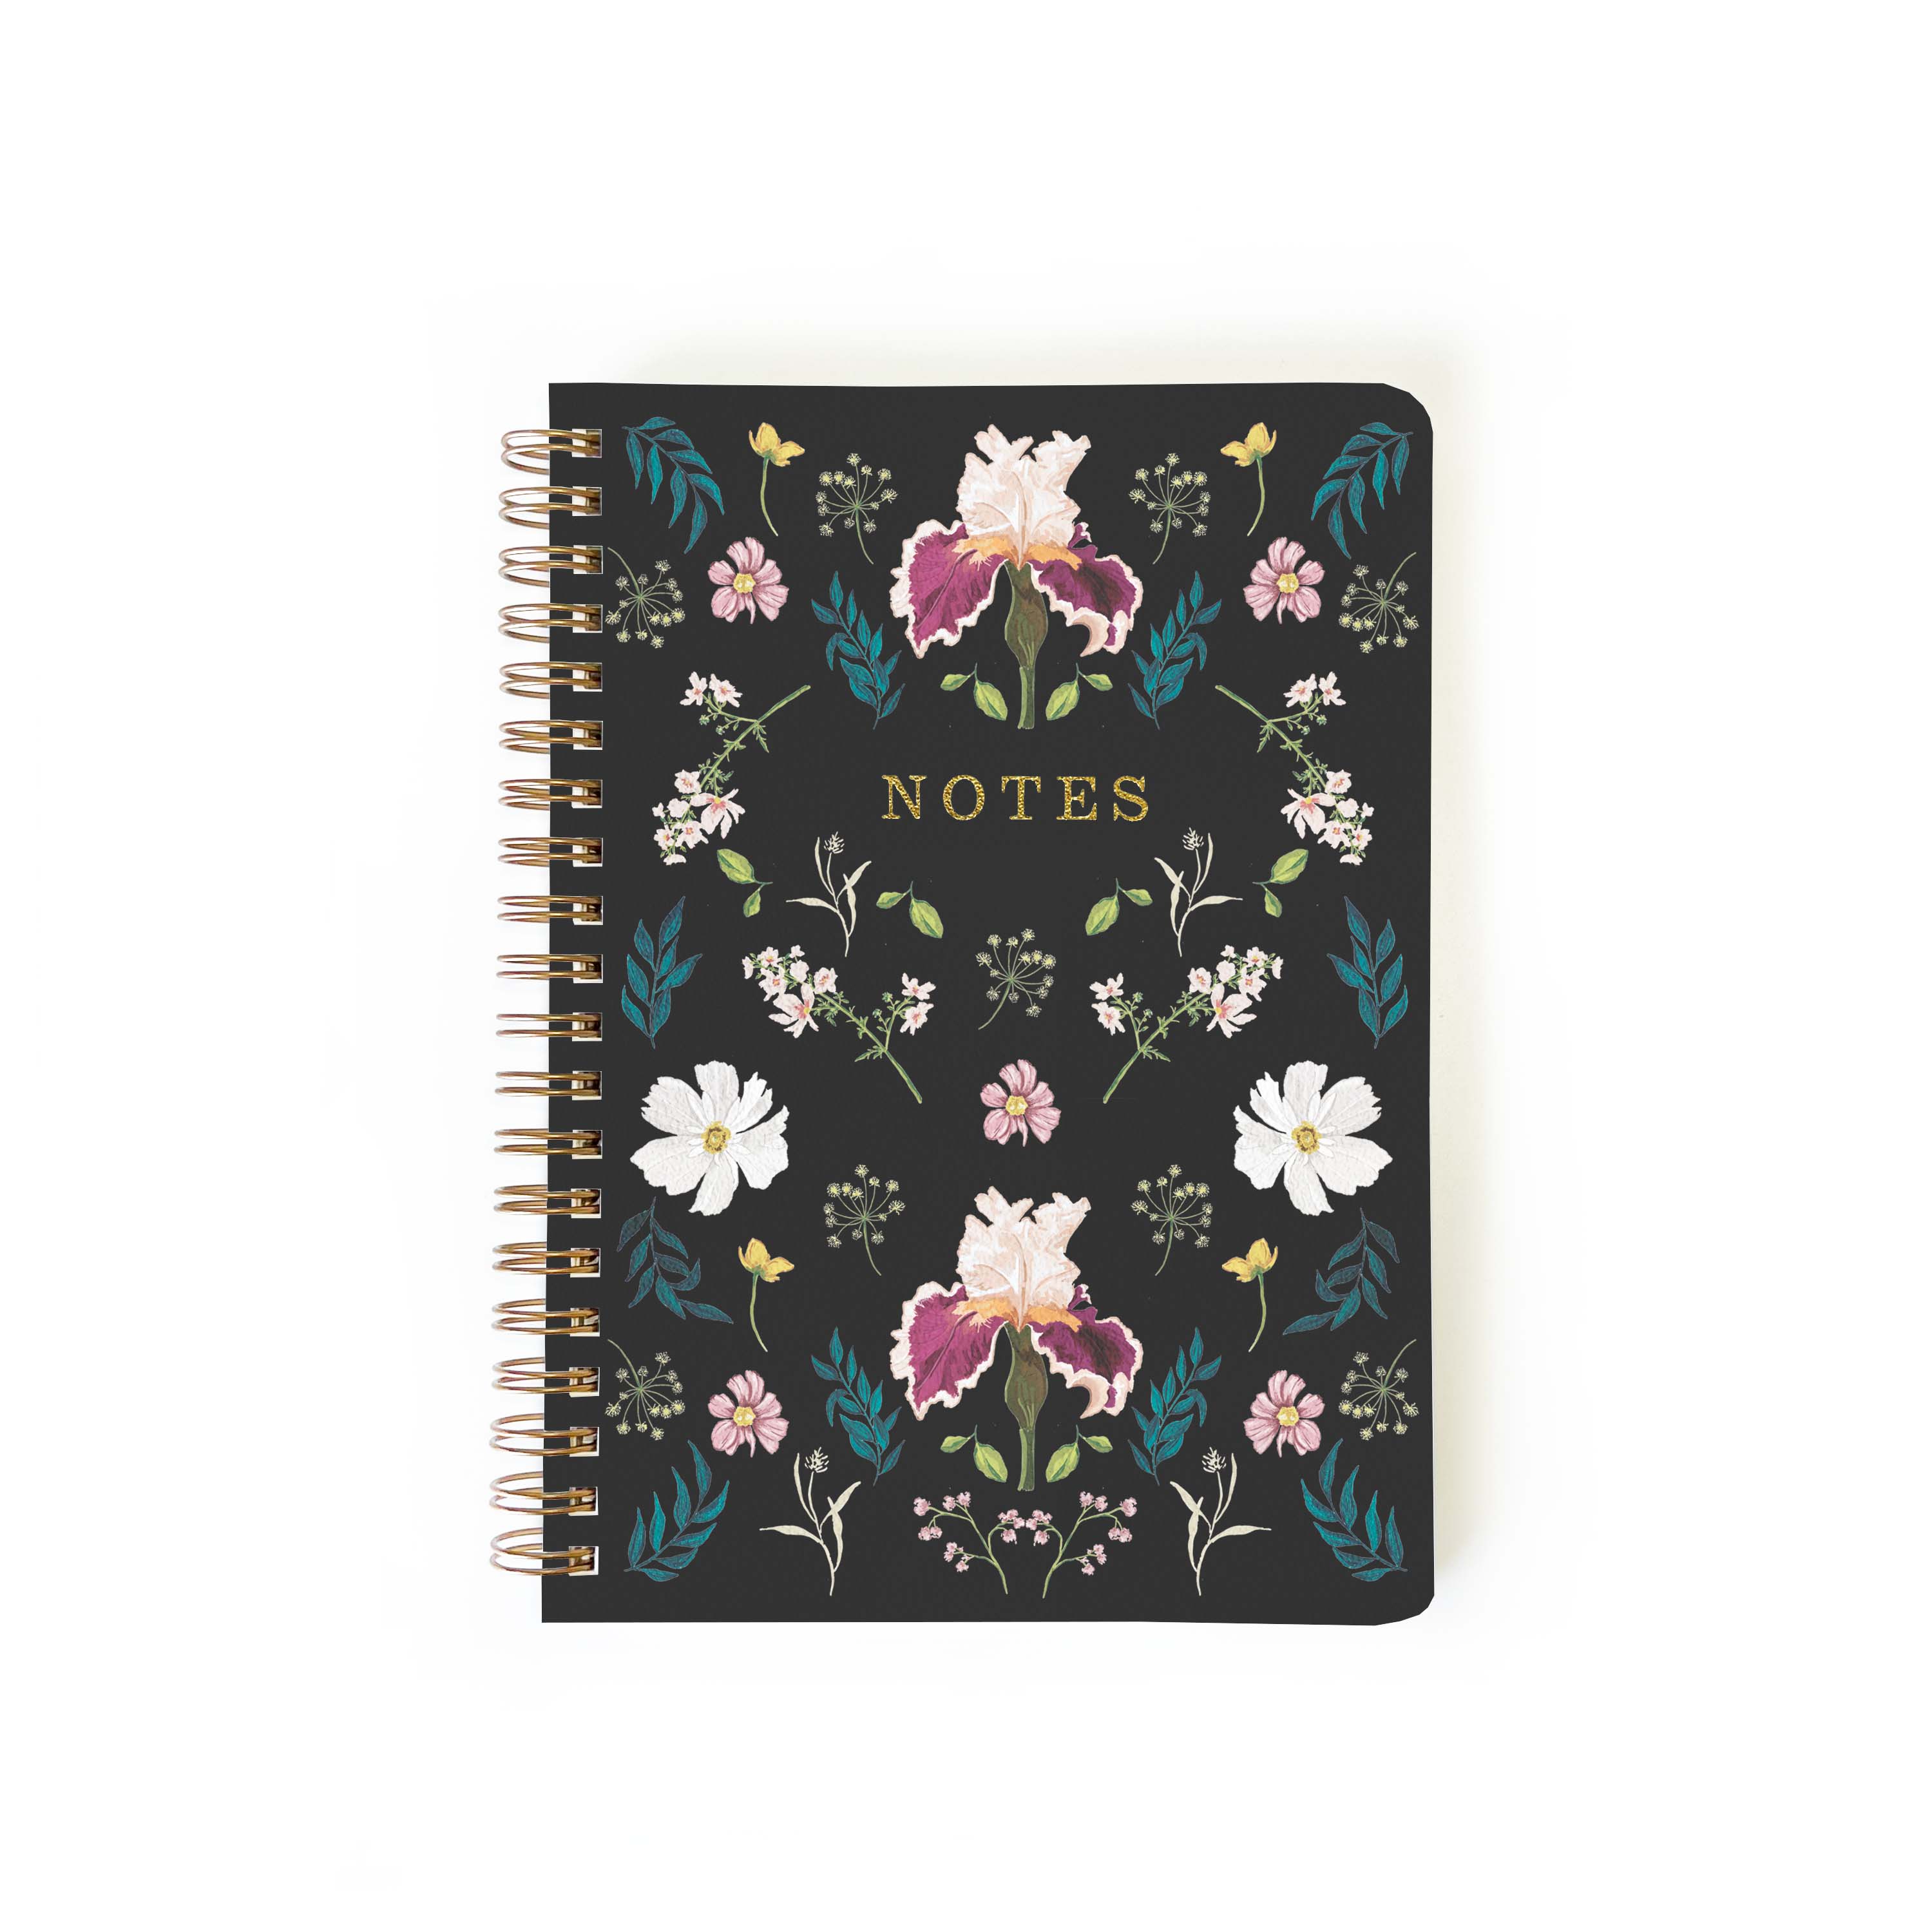 Botanica Notebook Journal: Small Notebook / Blank Pages